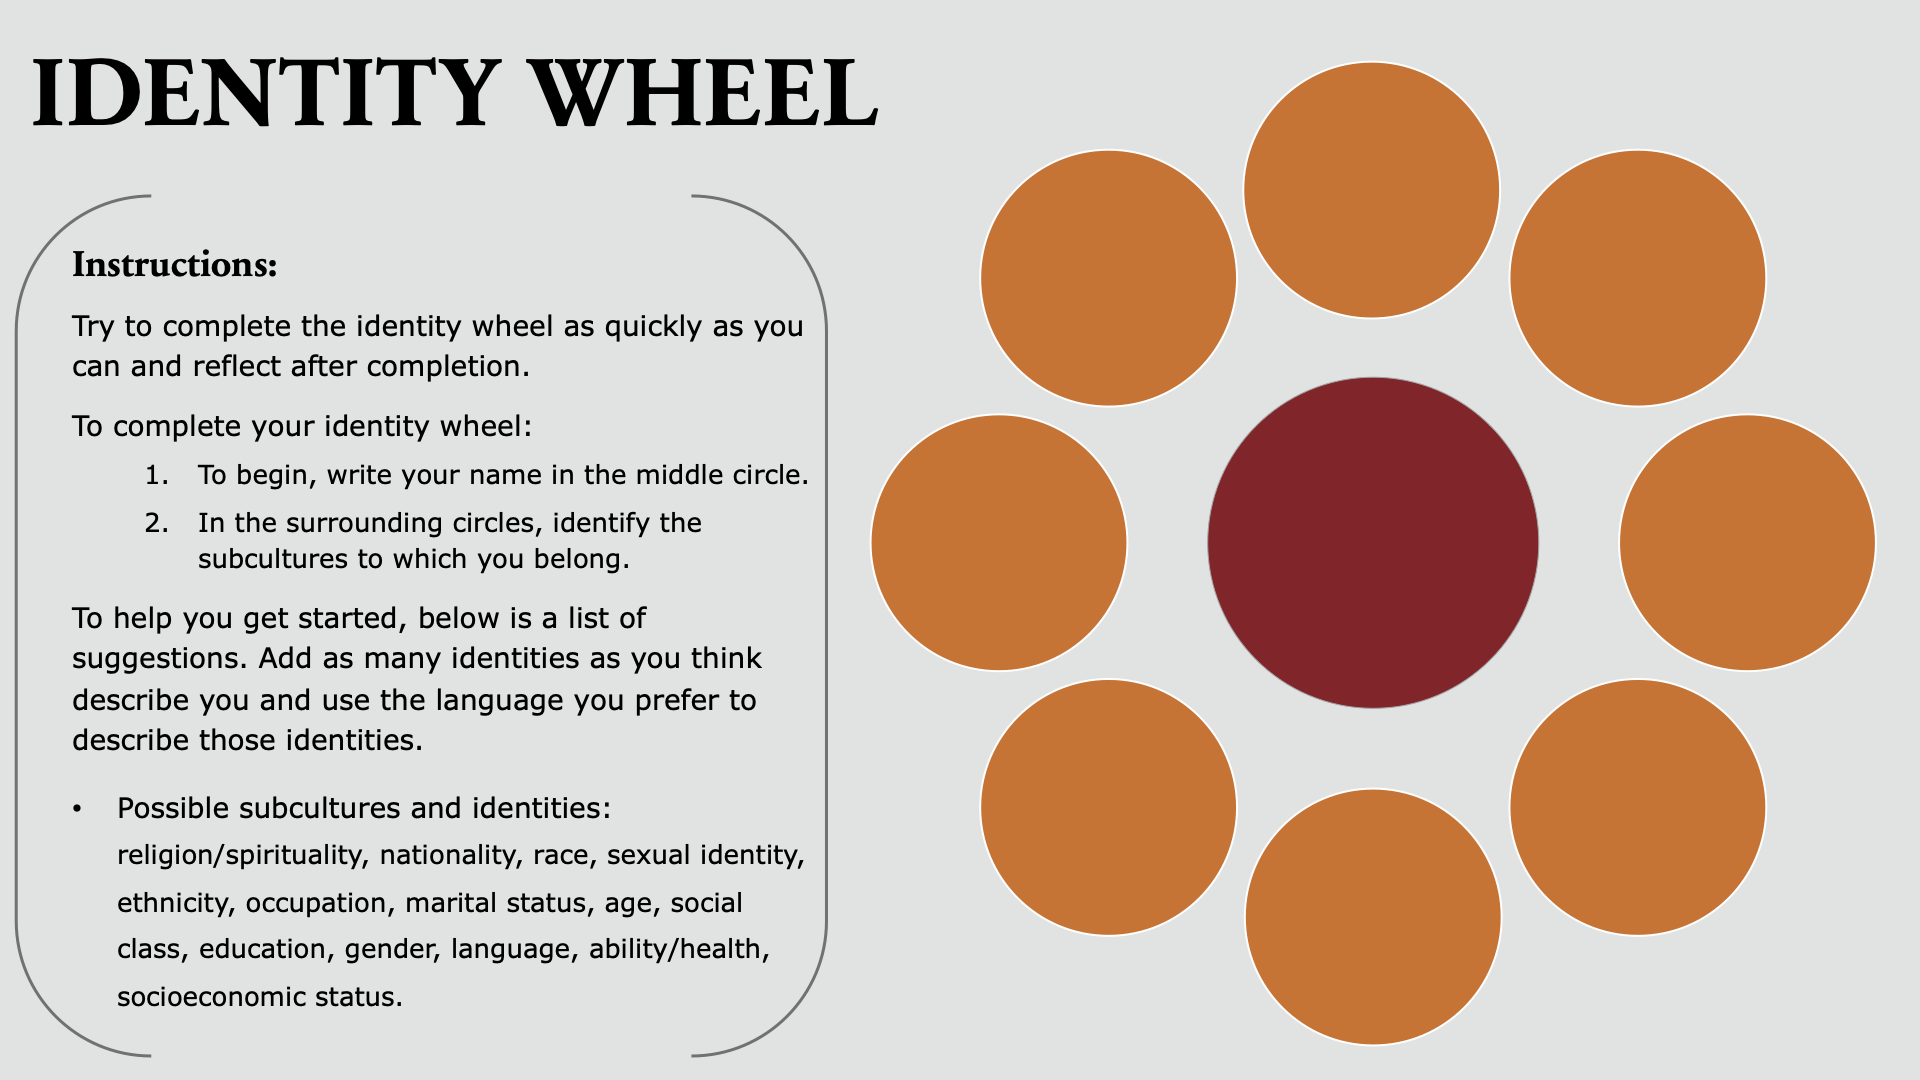 Identity Wheel Activity image showing the activity instructions on the left and on the right a brainstorm map with one larger burgundy circle in the middle where you write your name, surrounded by eight smaller orange circles where you write the subcultures and identities that describe you, using the language you prefer to use.